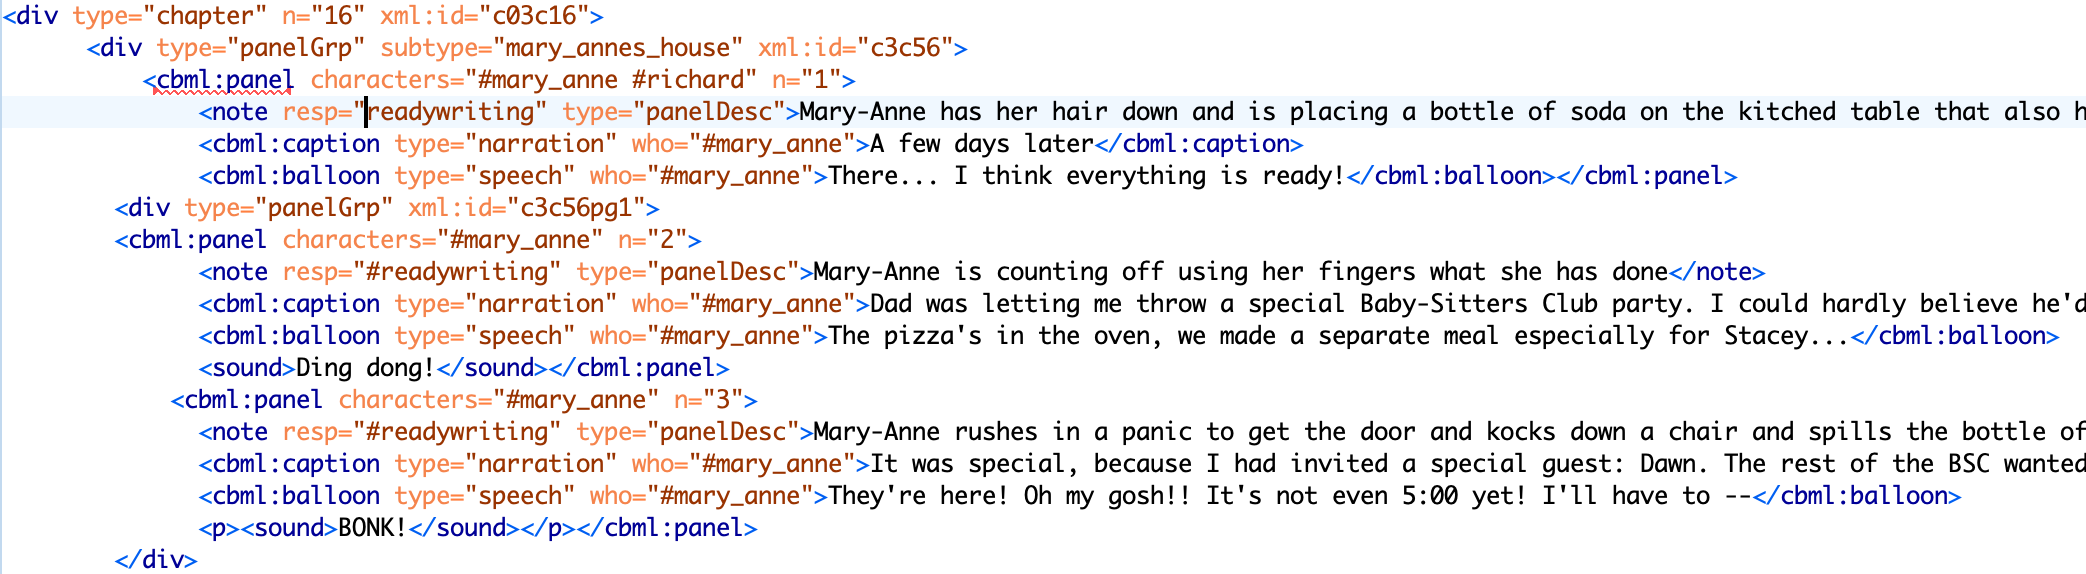 Lee's markup of Mary Anne Saves the Day using CBML